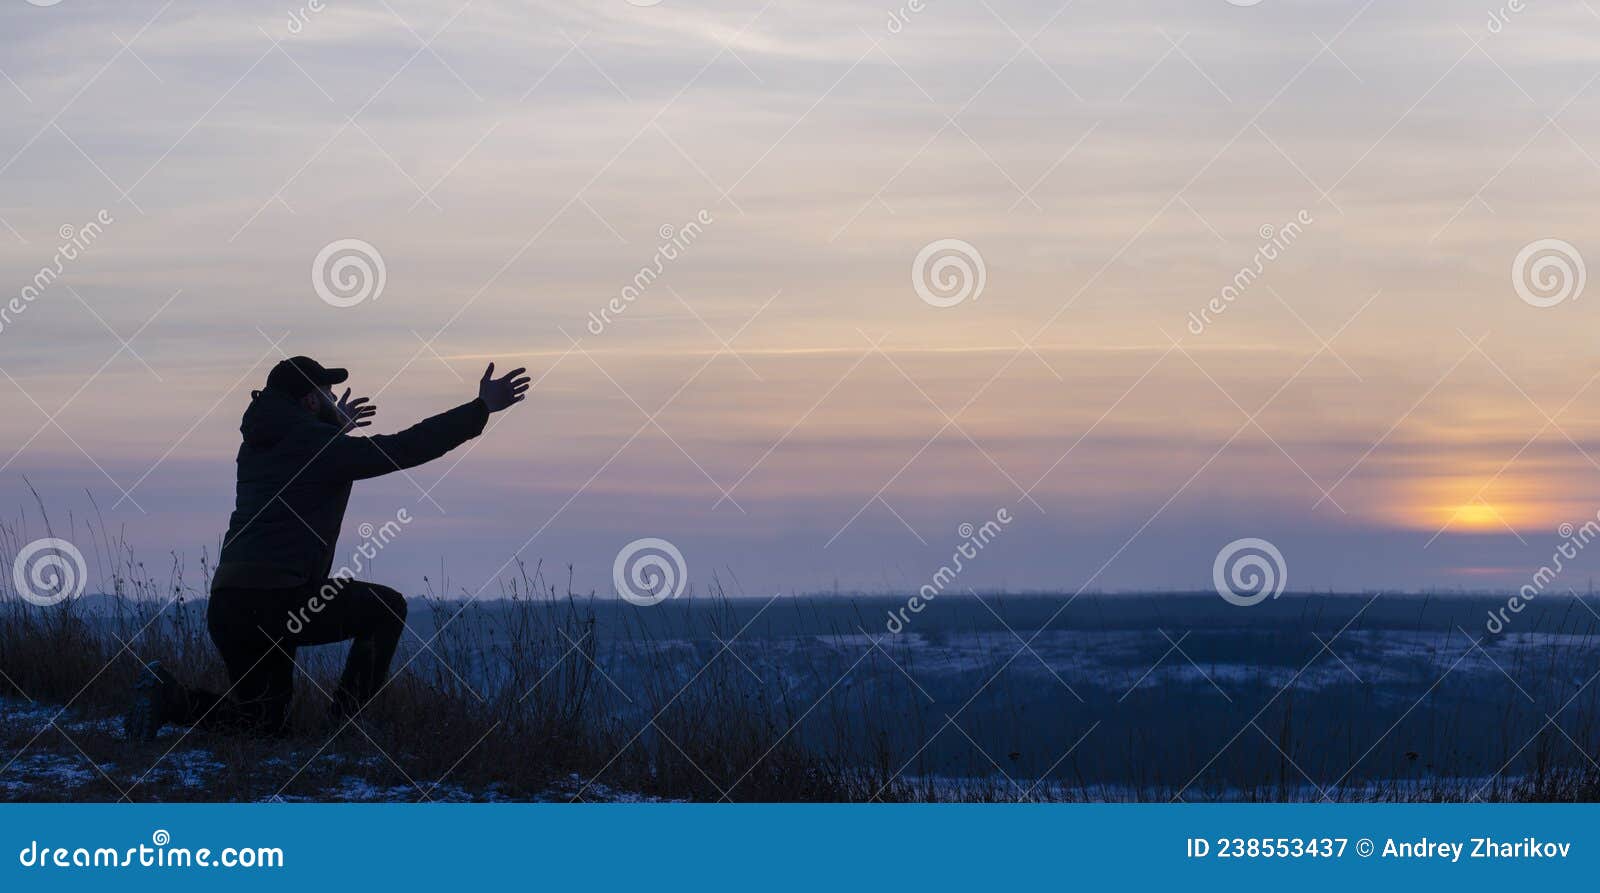 Prayer. Repentance. Silhouetted Men On A Background Of Blue Sky And ...